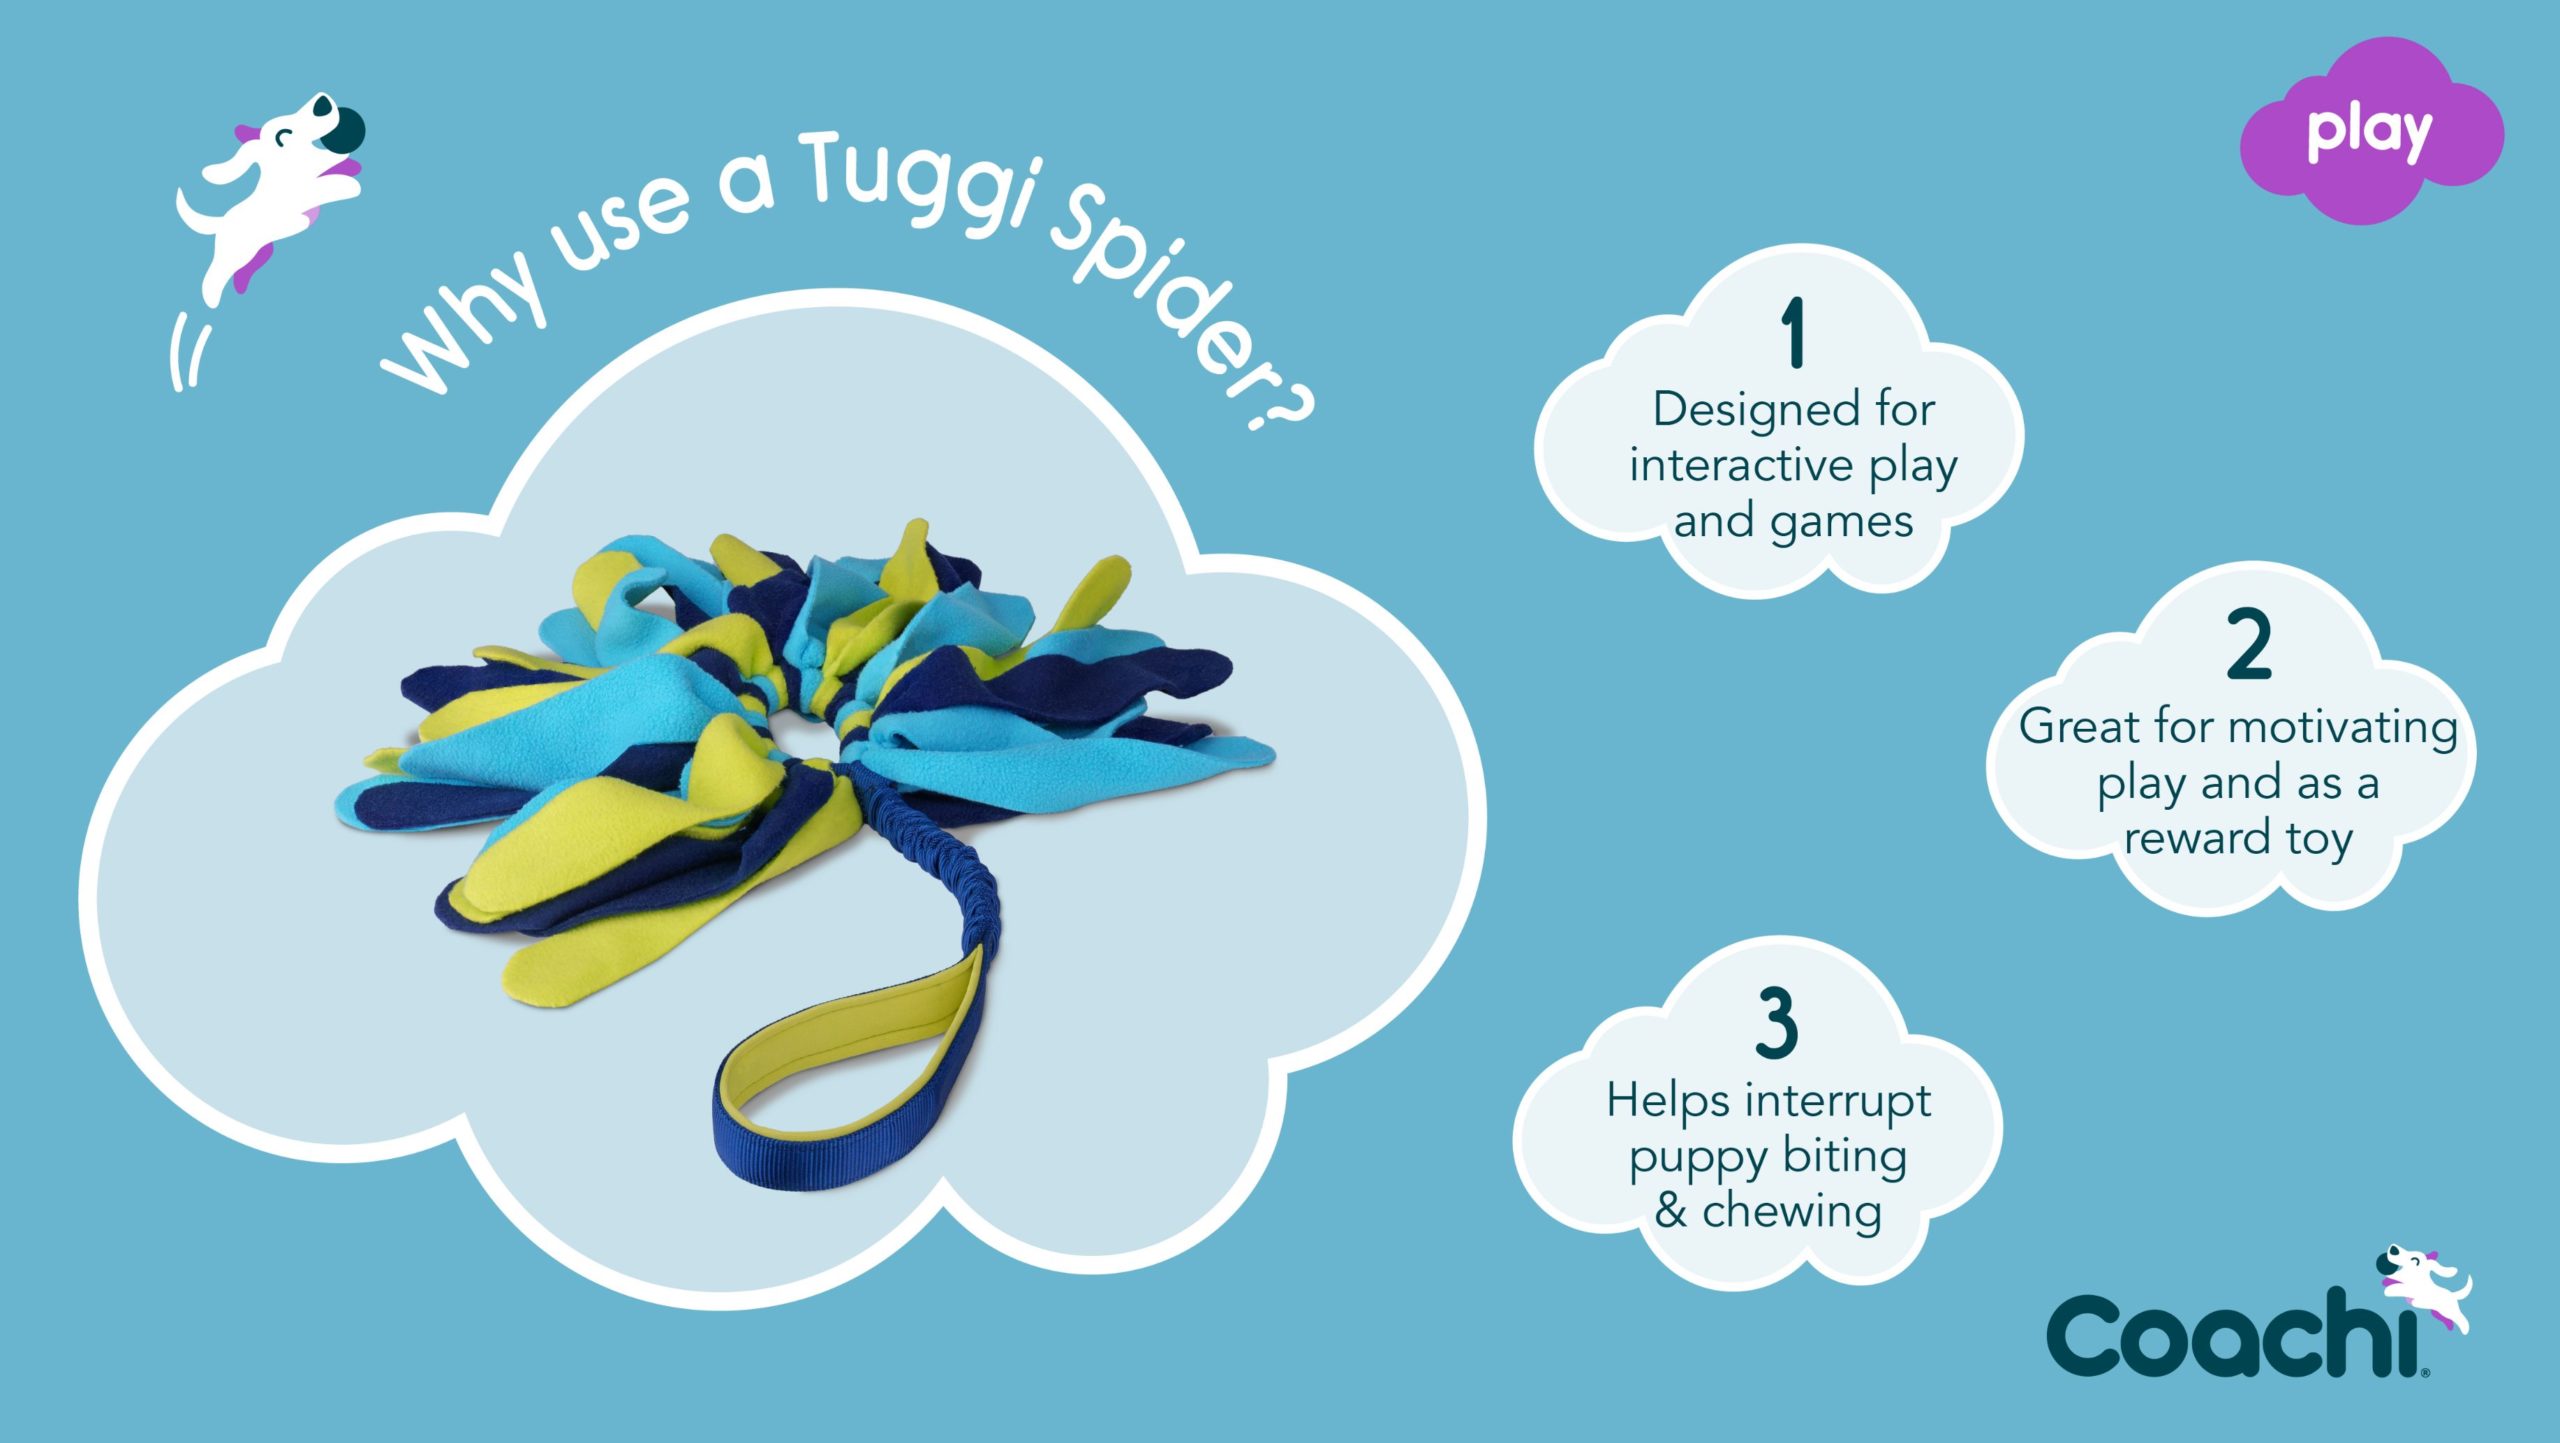 why use a Tuggi Spider